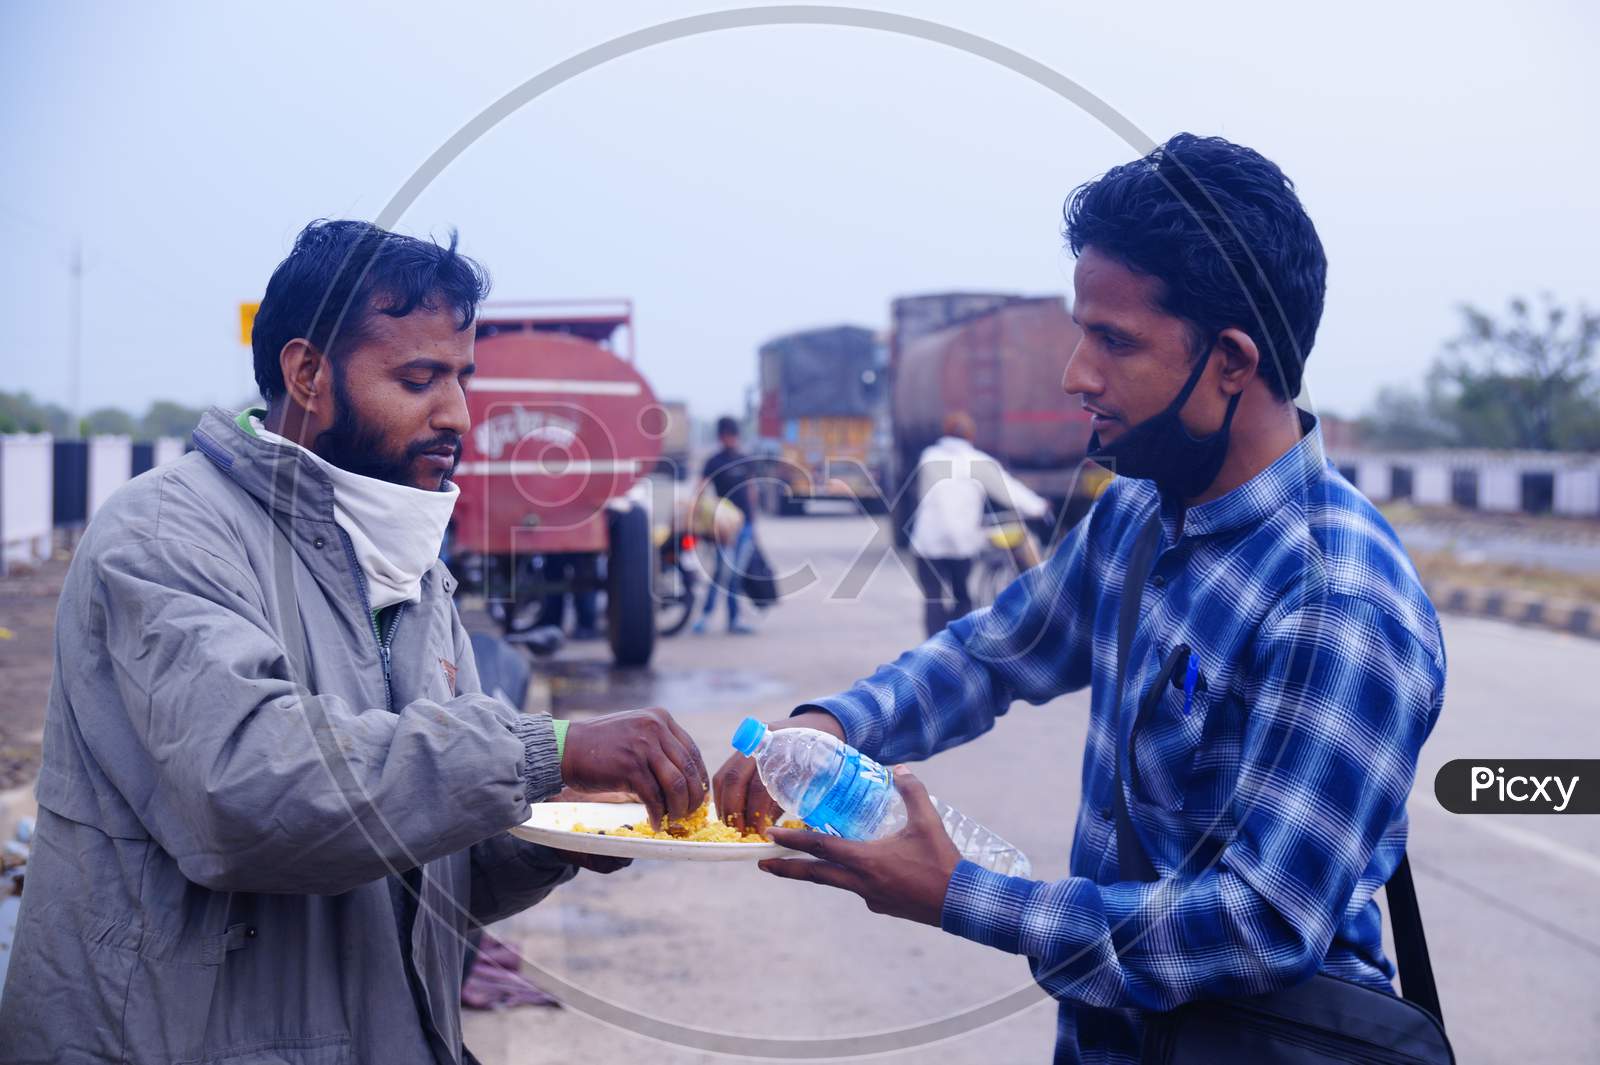 Two migrants sharing a plate of food while traveling to their native place in lockdown